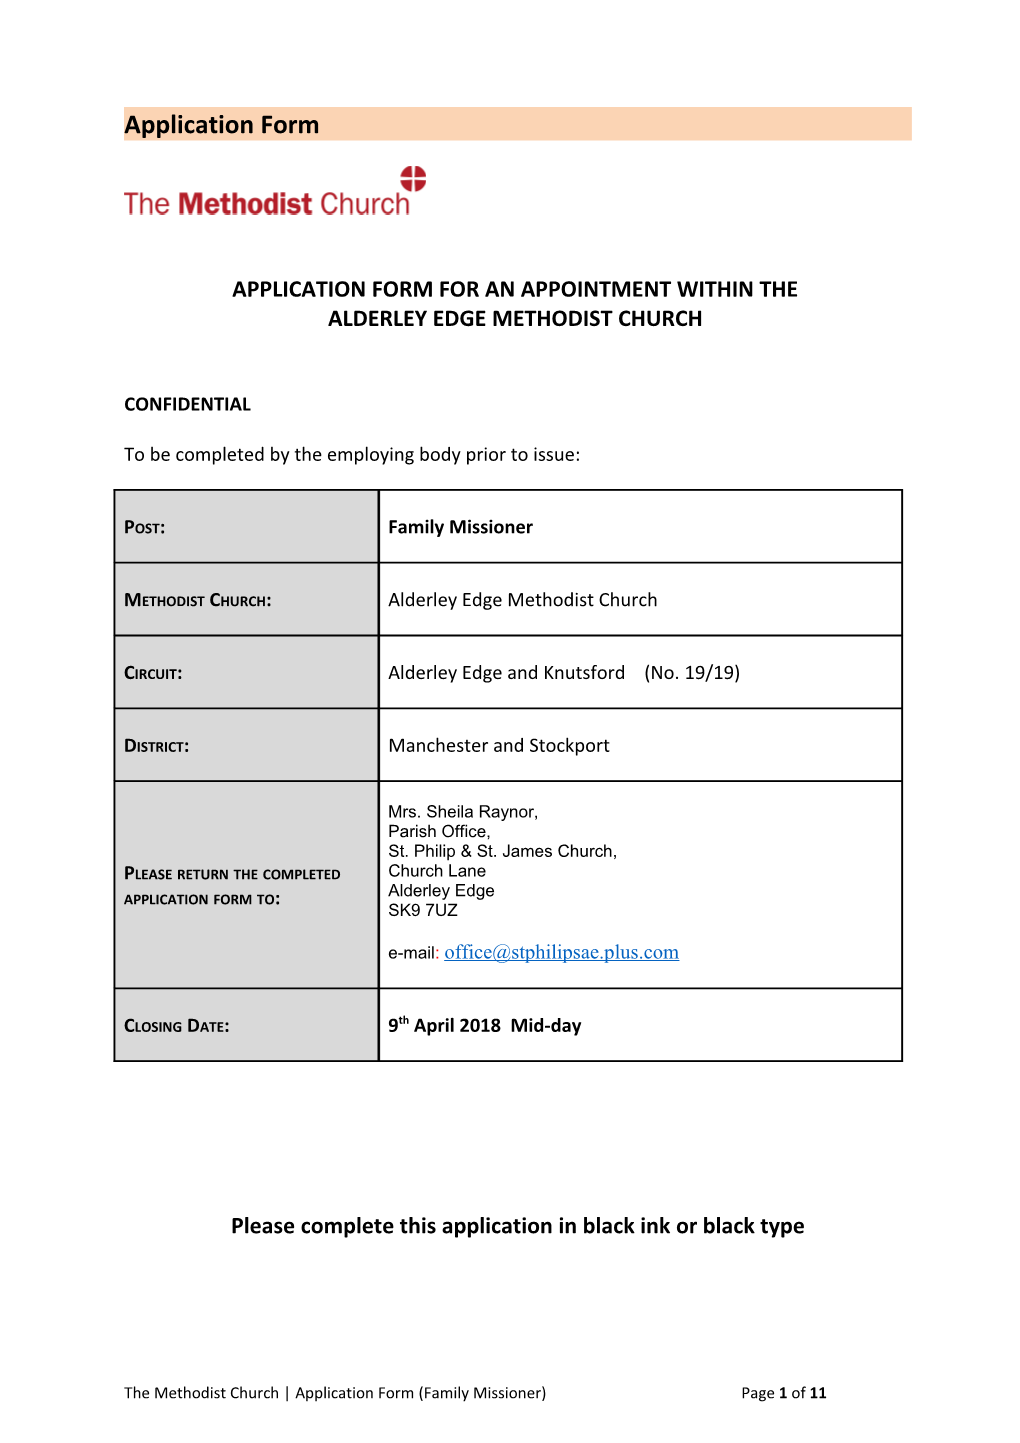 Application Form for an Appointment Within The